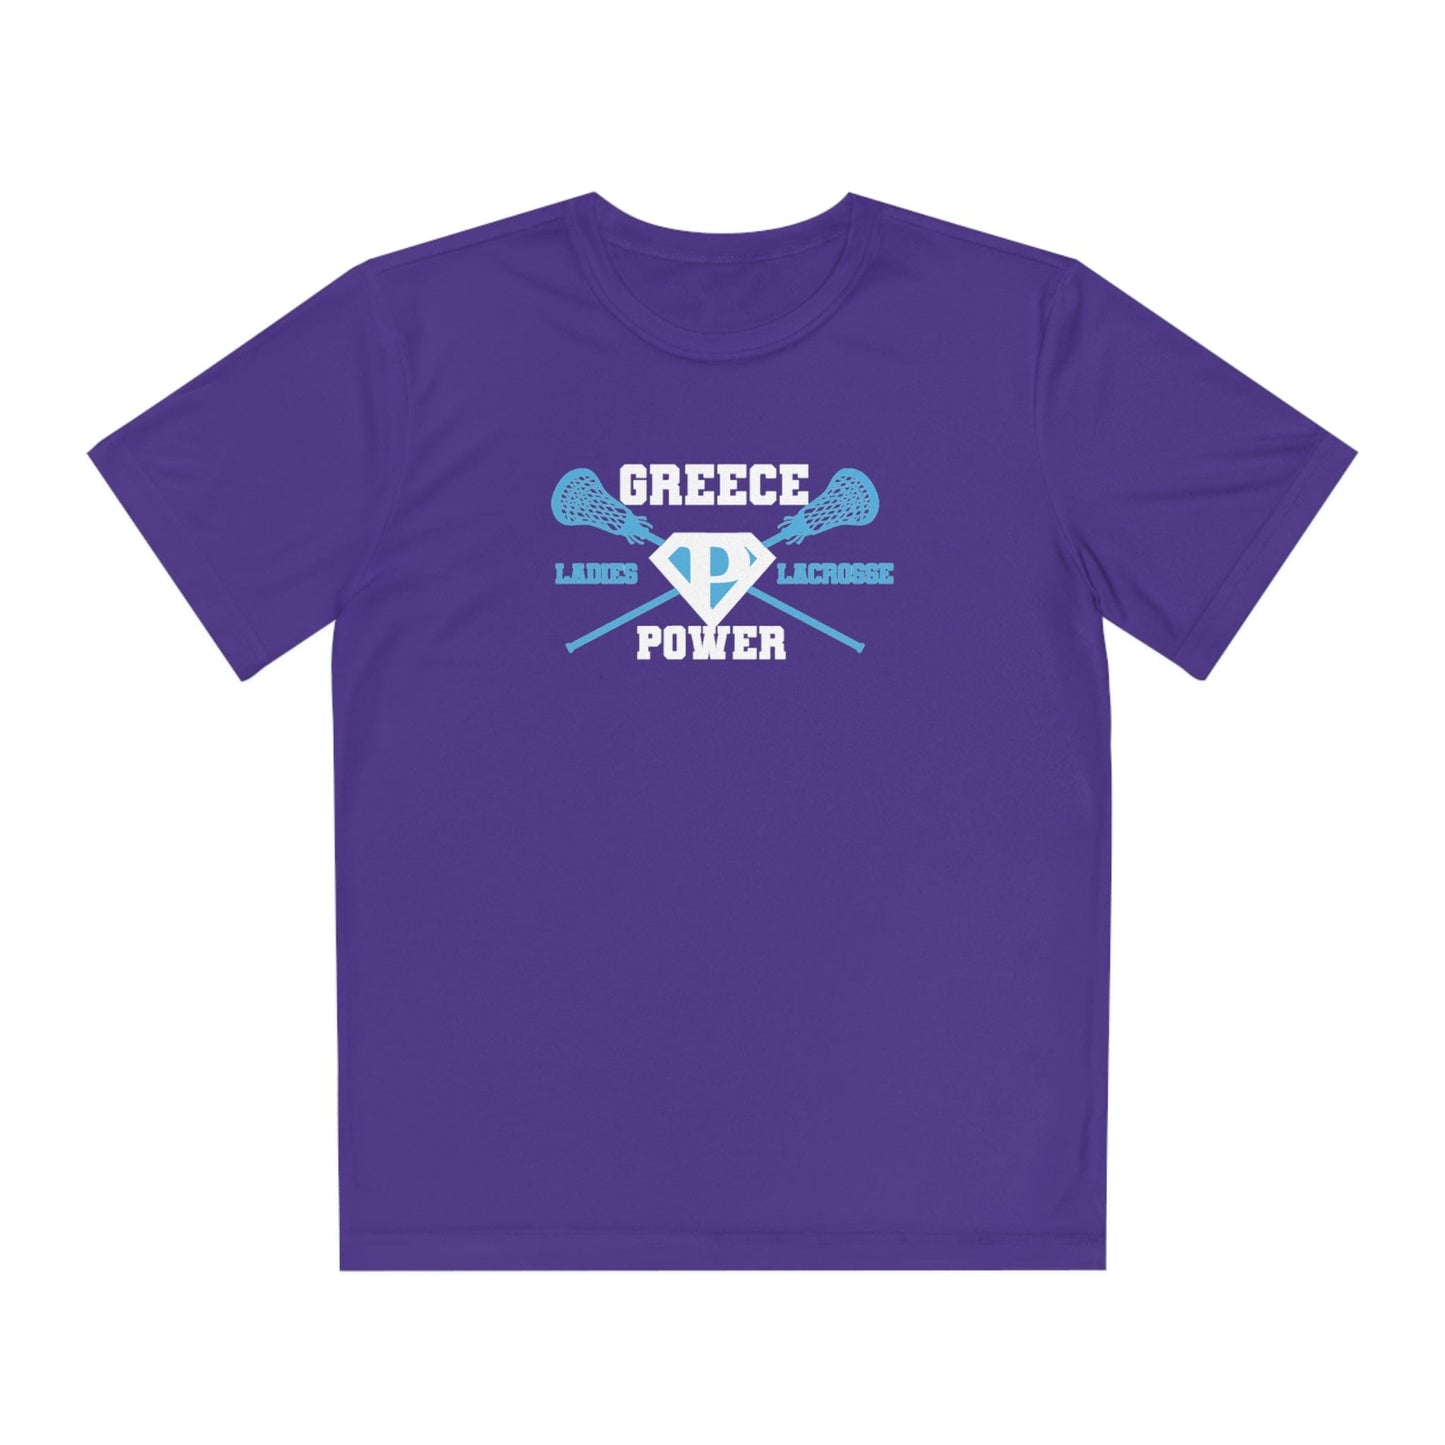 Greece Power LLC Youth Athletic T-Shirt Signature Lacrosse